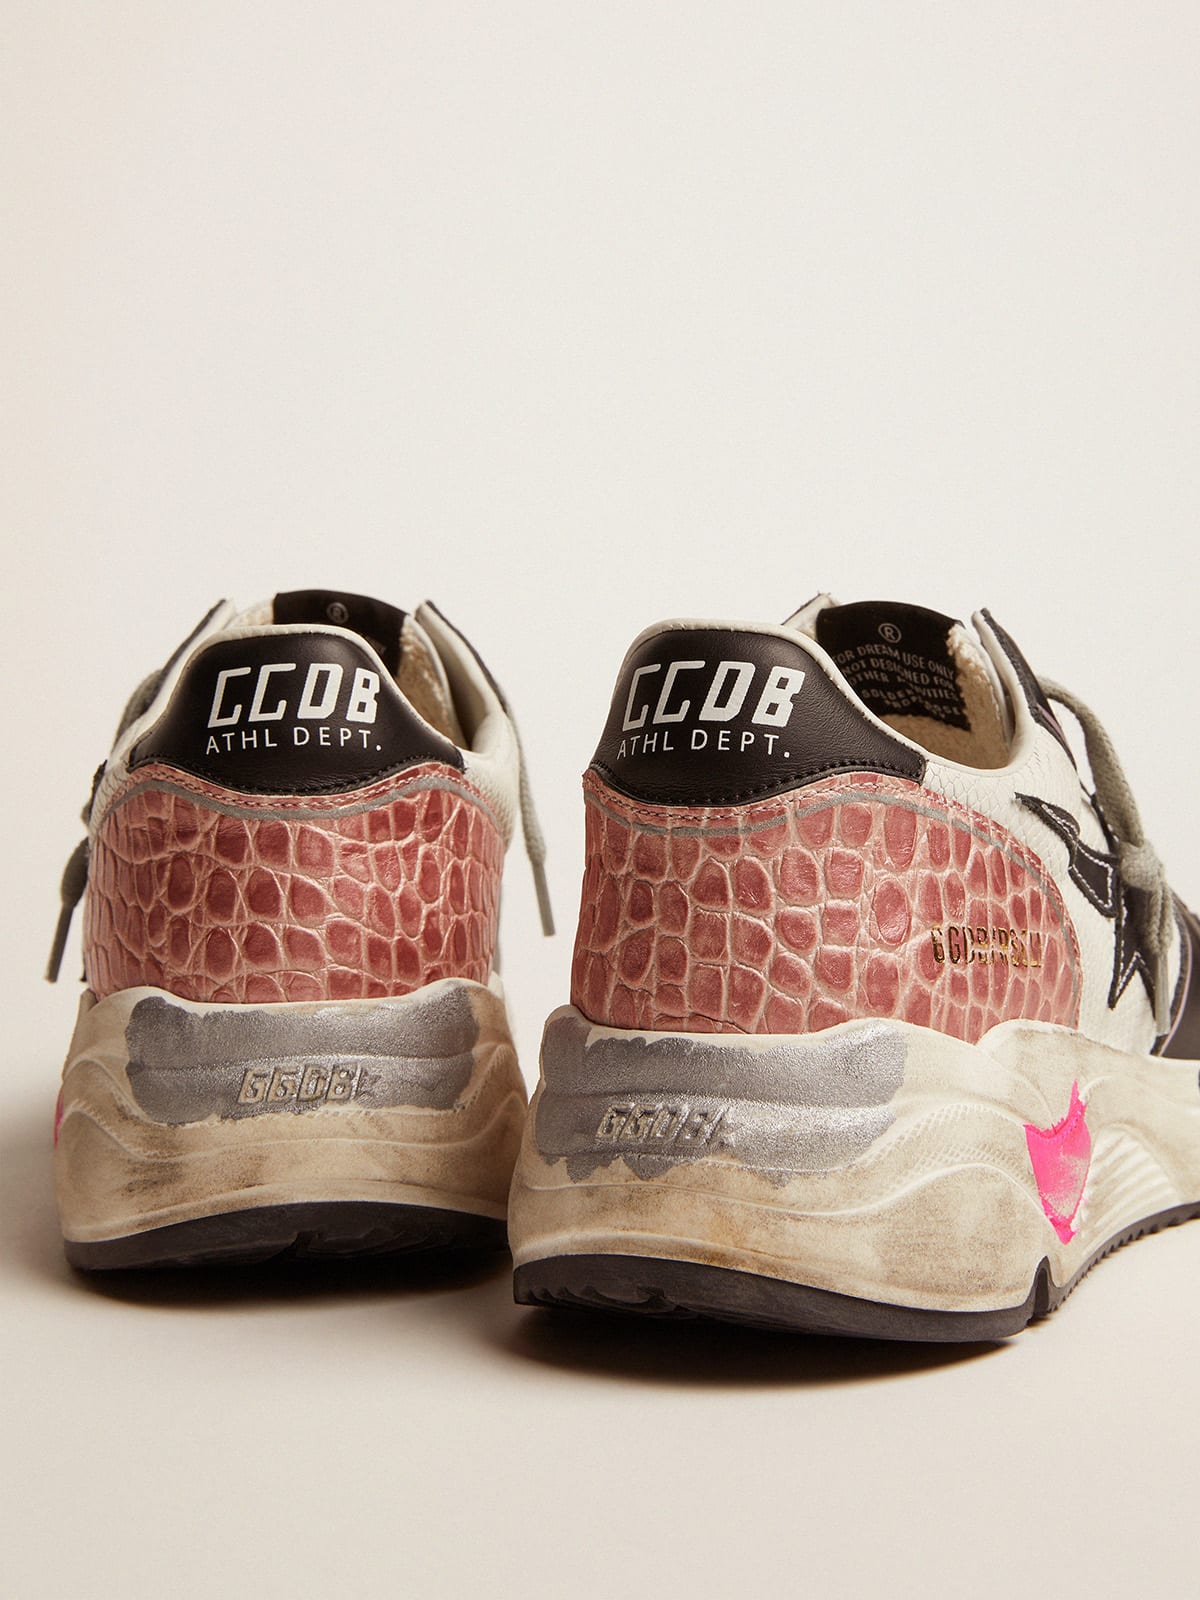 Golden Goose - Running Sole sneakers in white snake-print leather with contrasting black details in 